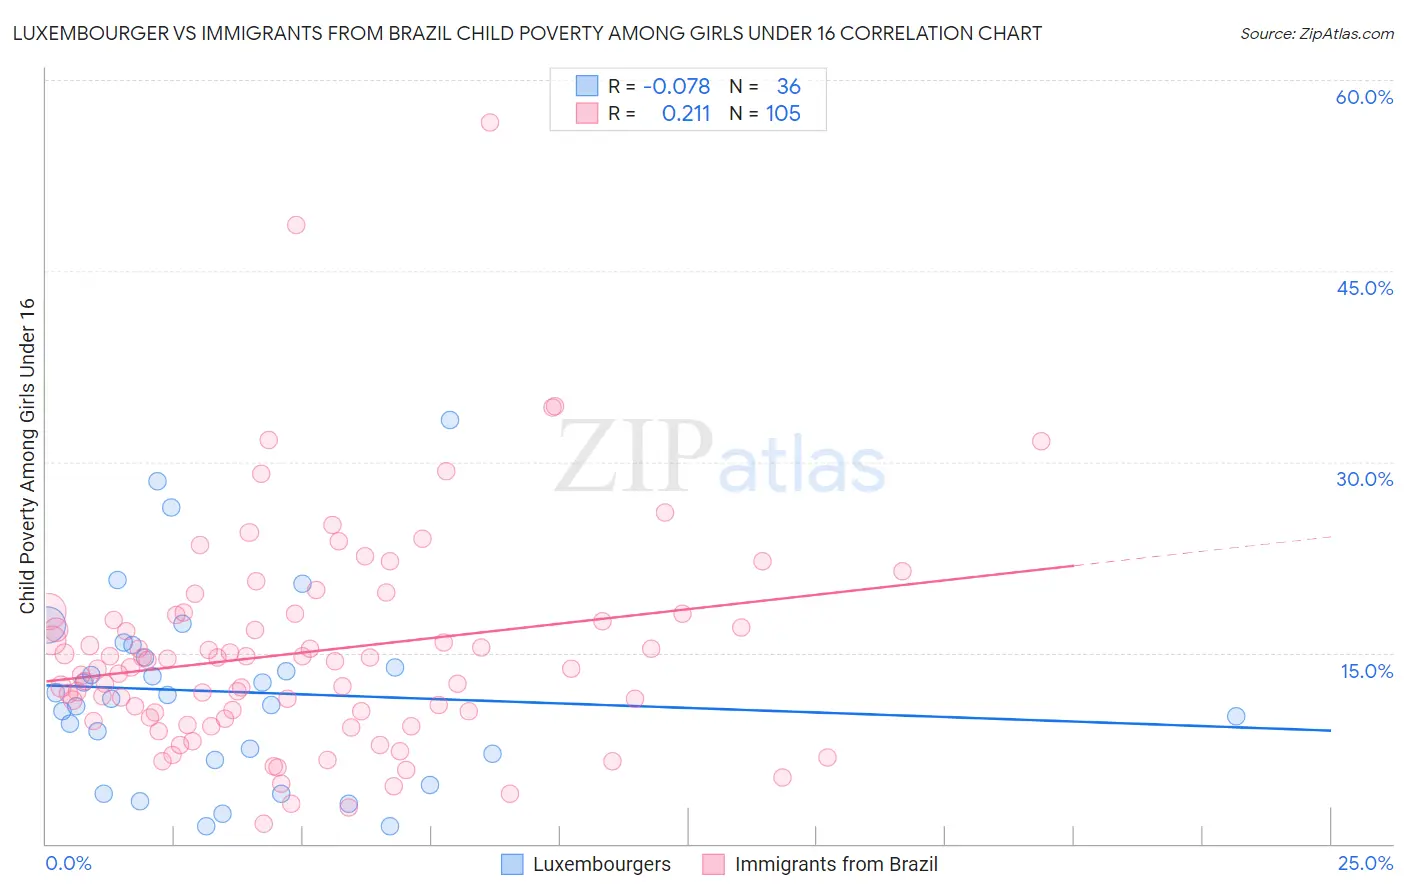 Luxembourger vs Immigrants from Brazil Child Poverty Among Girls Under 16